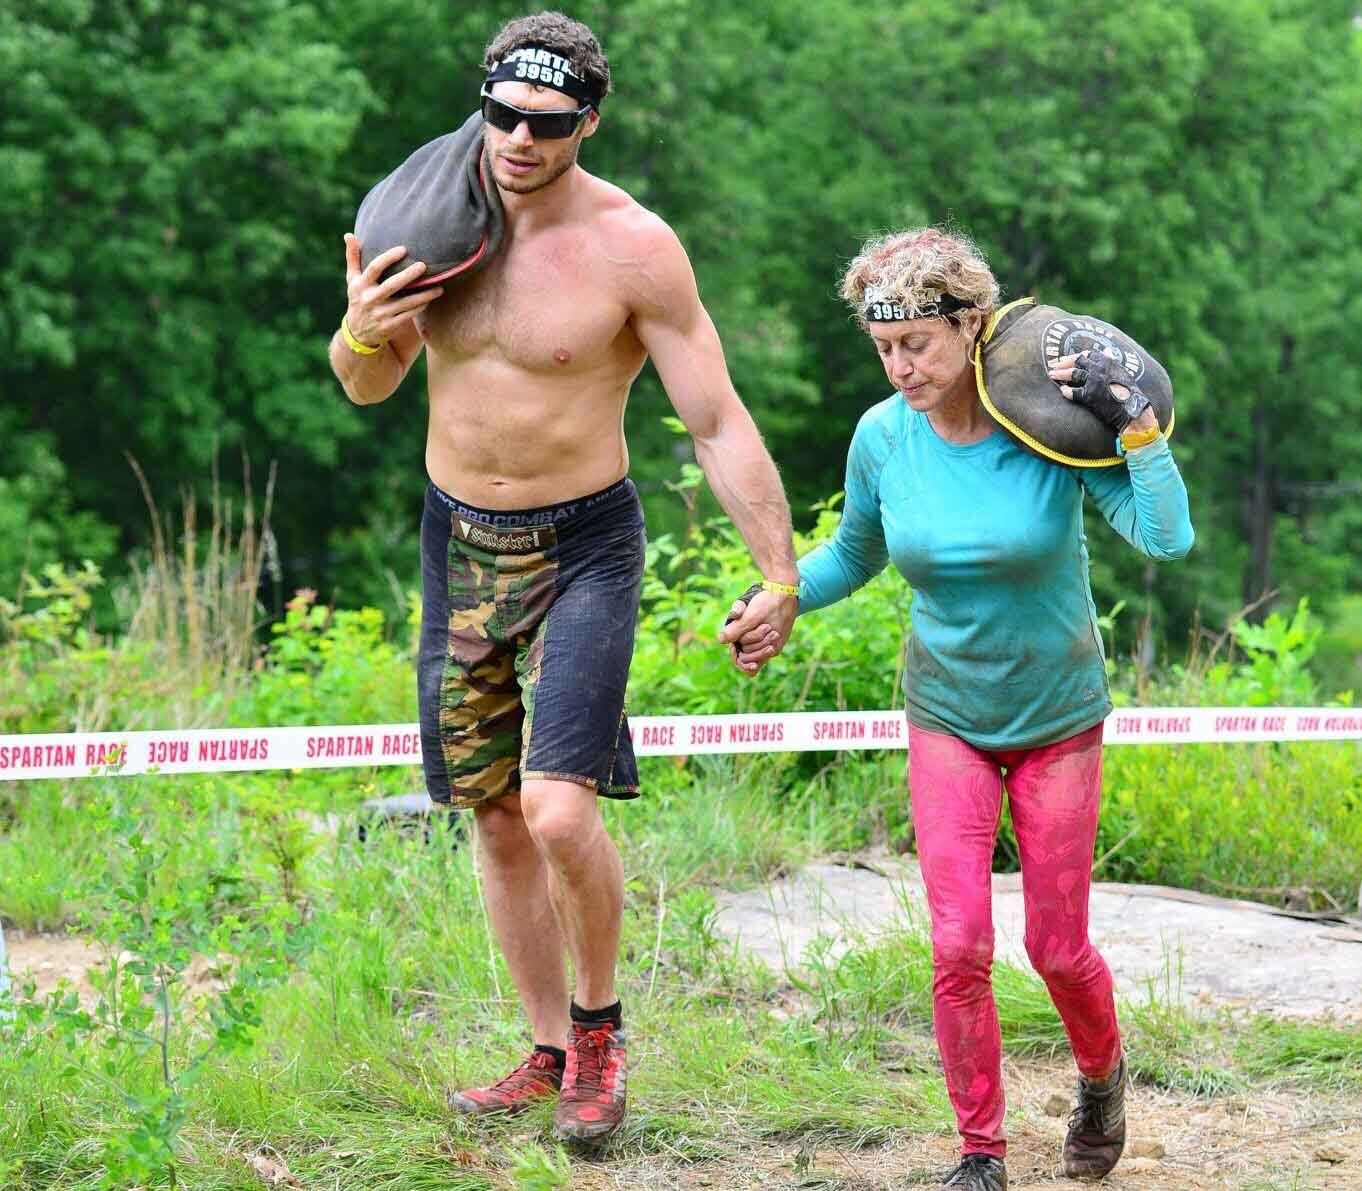 Brendan Weafer and his mother, Spartan Race